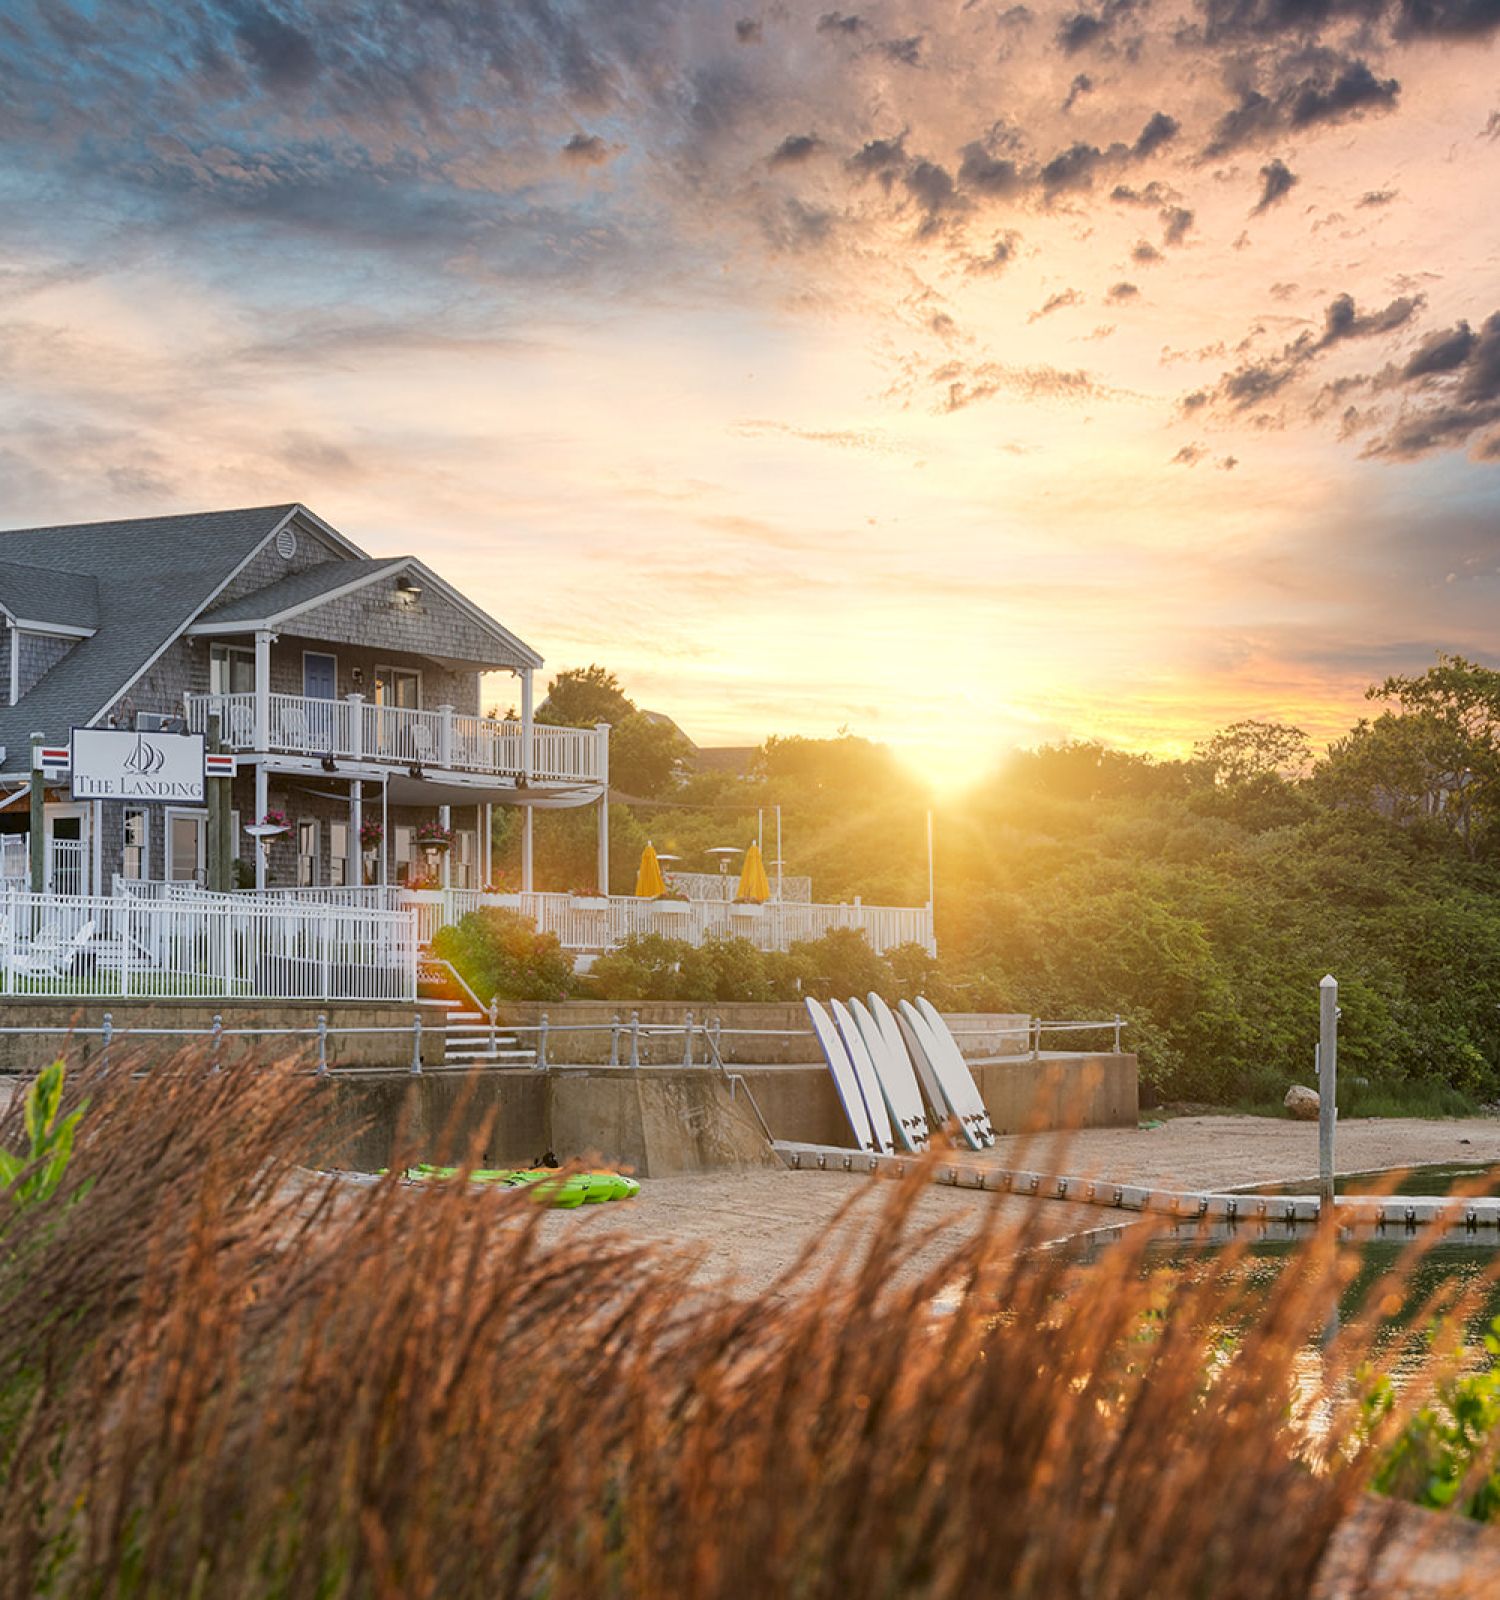 A house by the water with a deck, surrounded by greenery and flowers, with a beautiful sunset in the background ending the sentence.